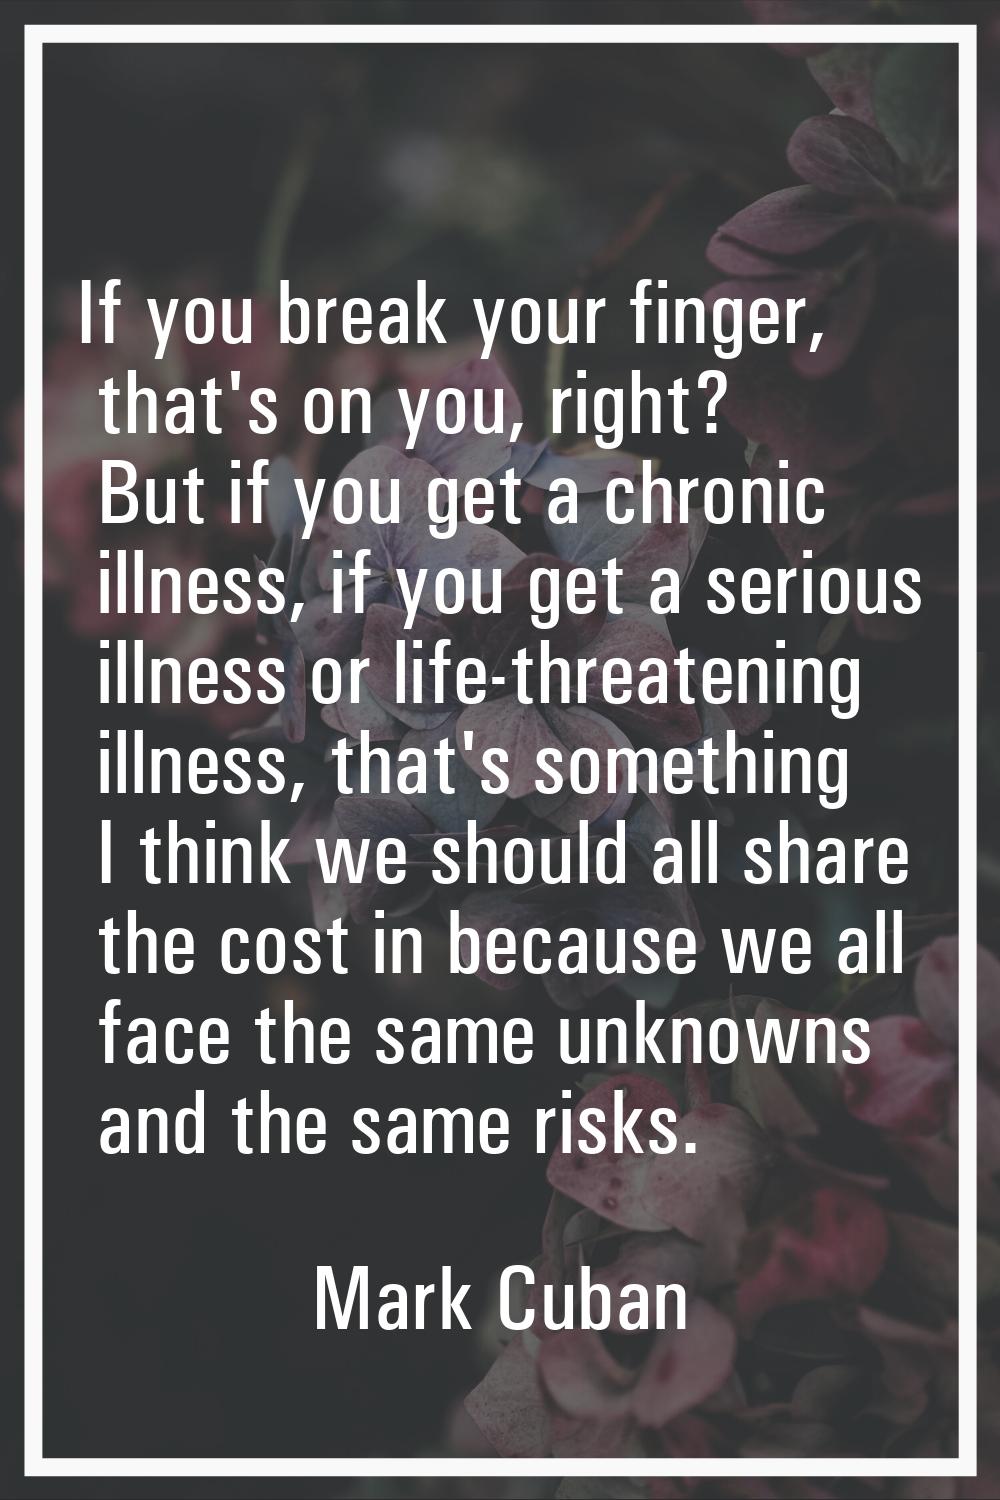 If you break your finger, that's on you, right? But if you get a chronic illness, if you get a seri